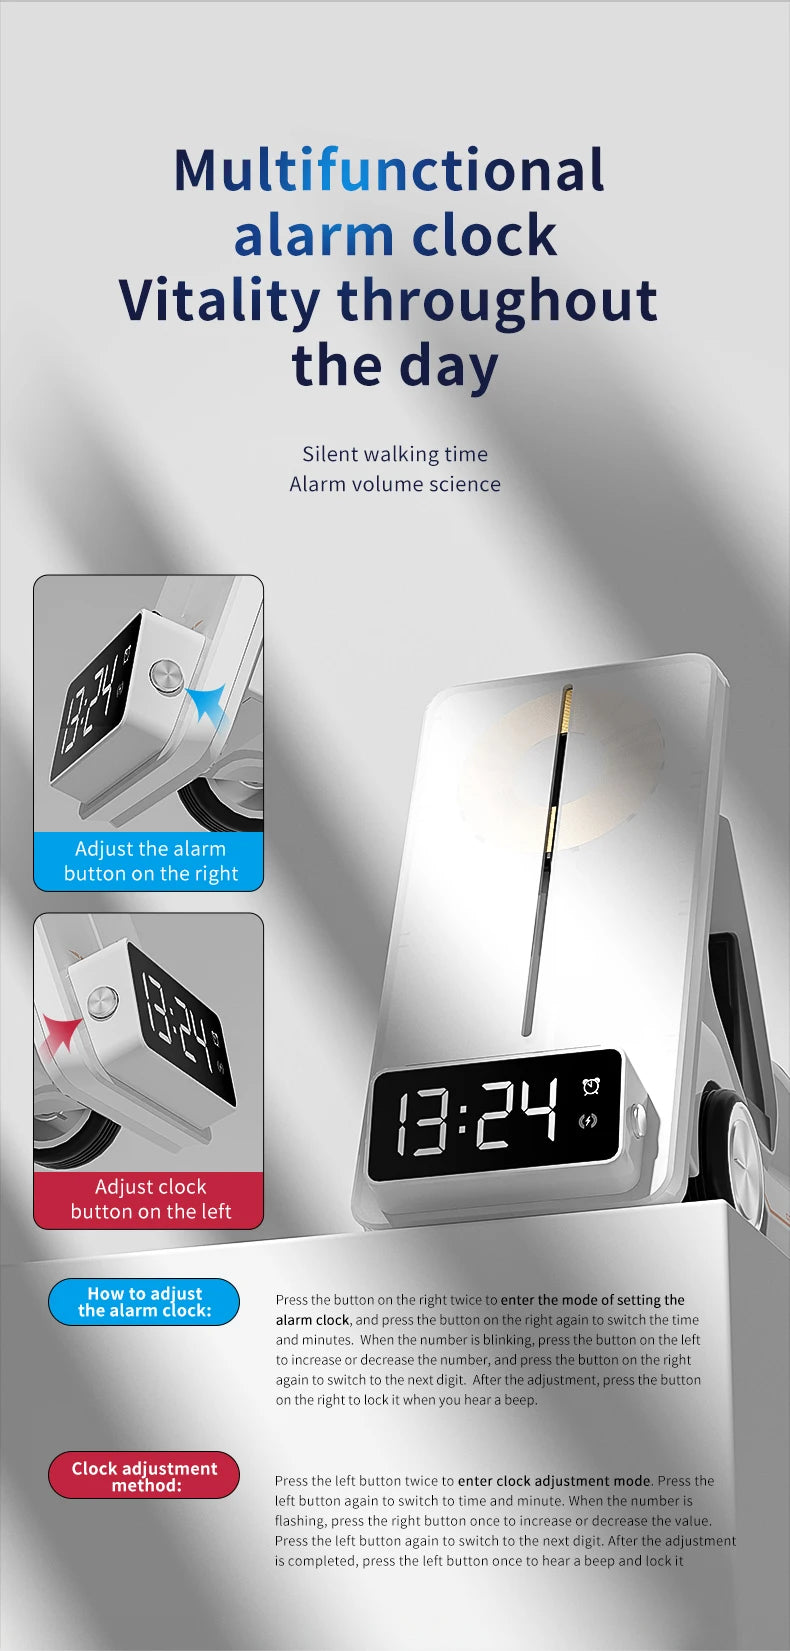 5-IN-1 Multi Alarm Clock &amp; Fast Charging Dock - iPhone 15/12/13/14 Pro Max, Apple Watch, AirPods Pro Charger